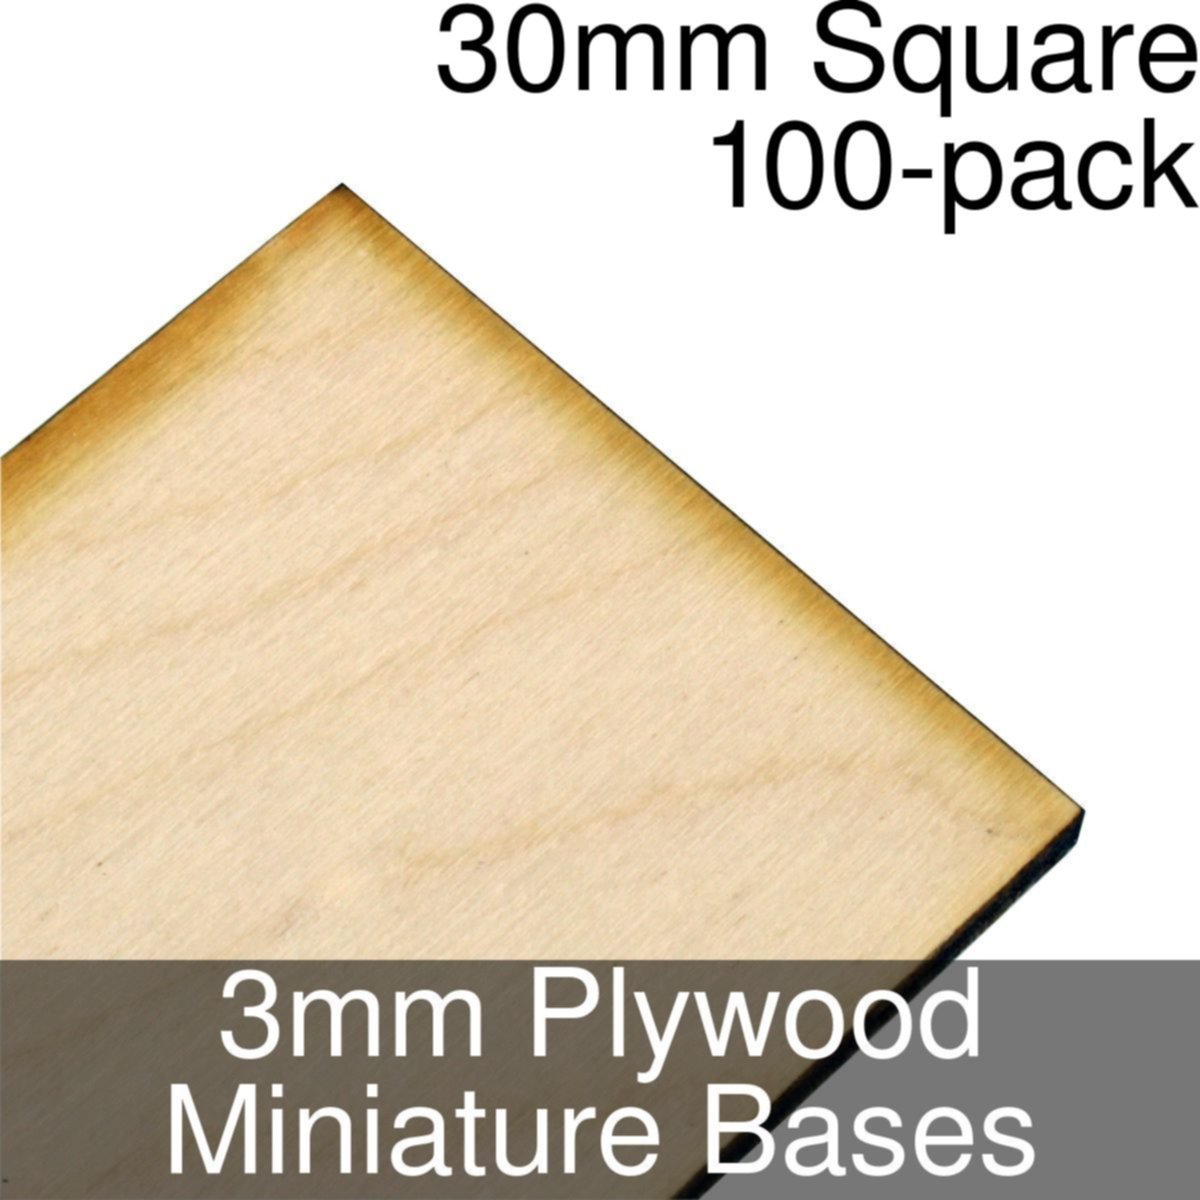 Miniature Bases, Square, 30mm, 3mm Plywood (100)